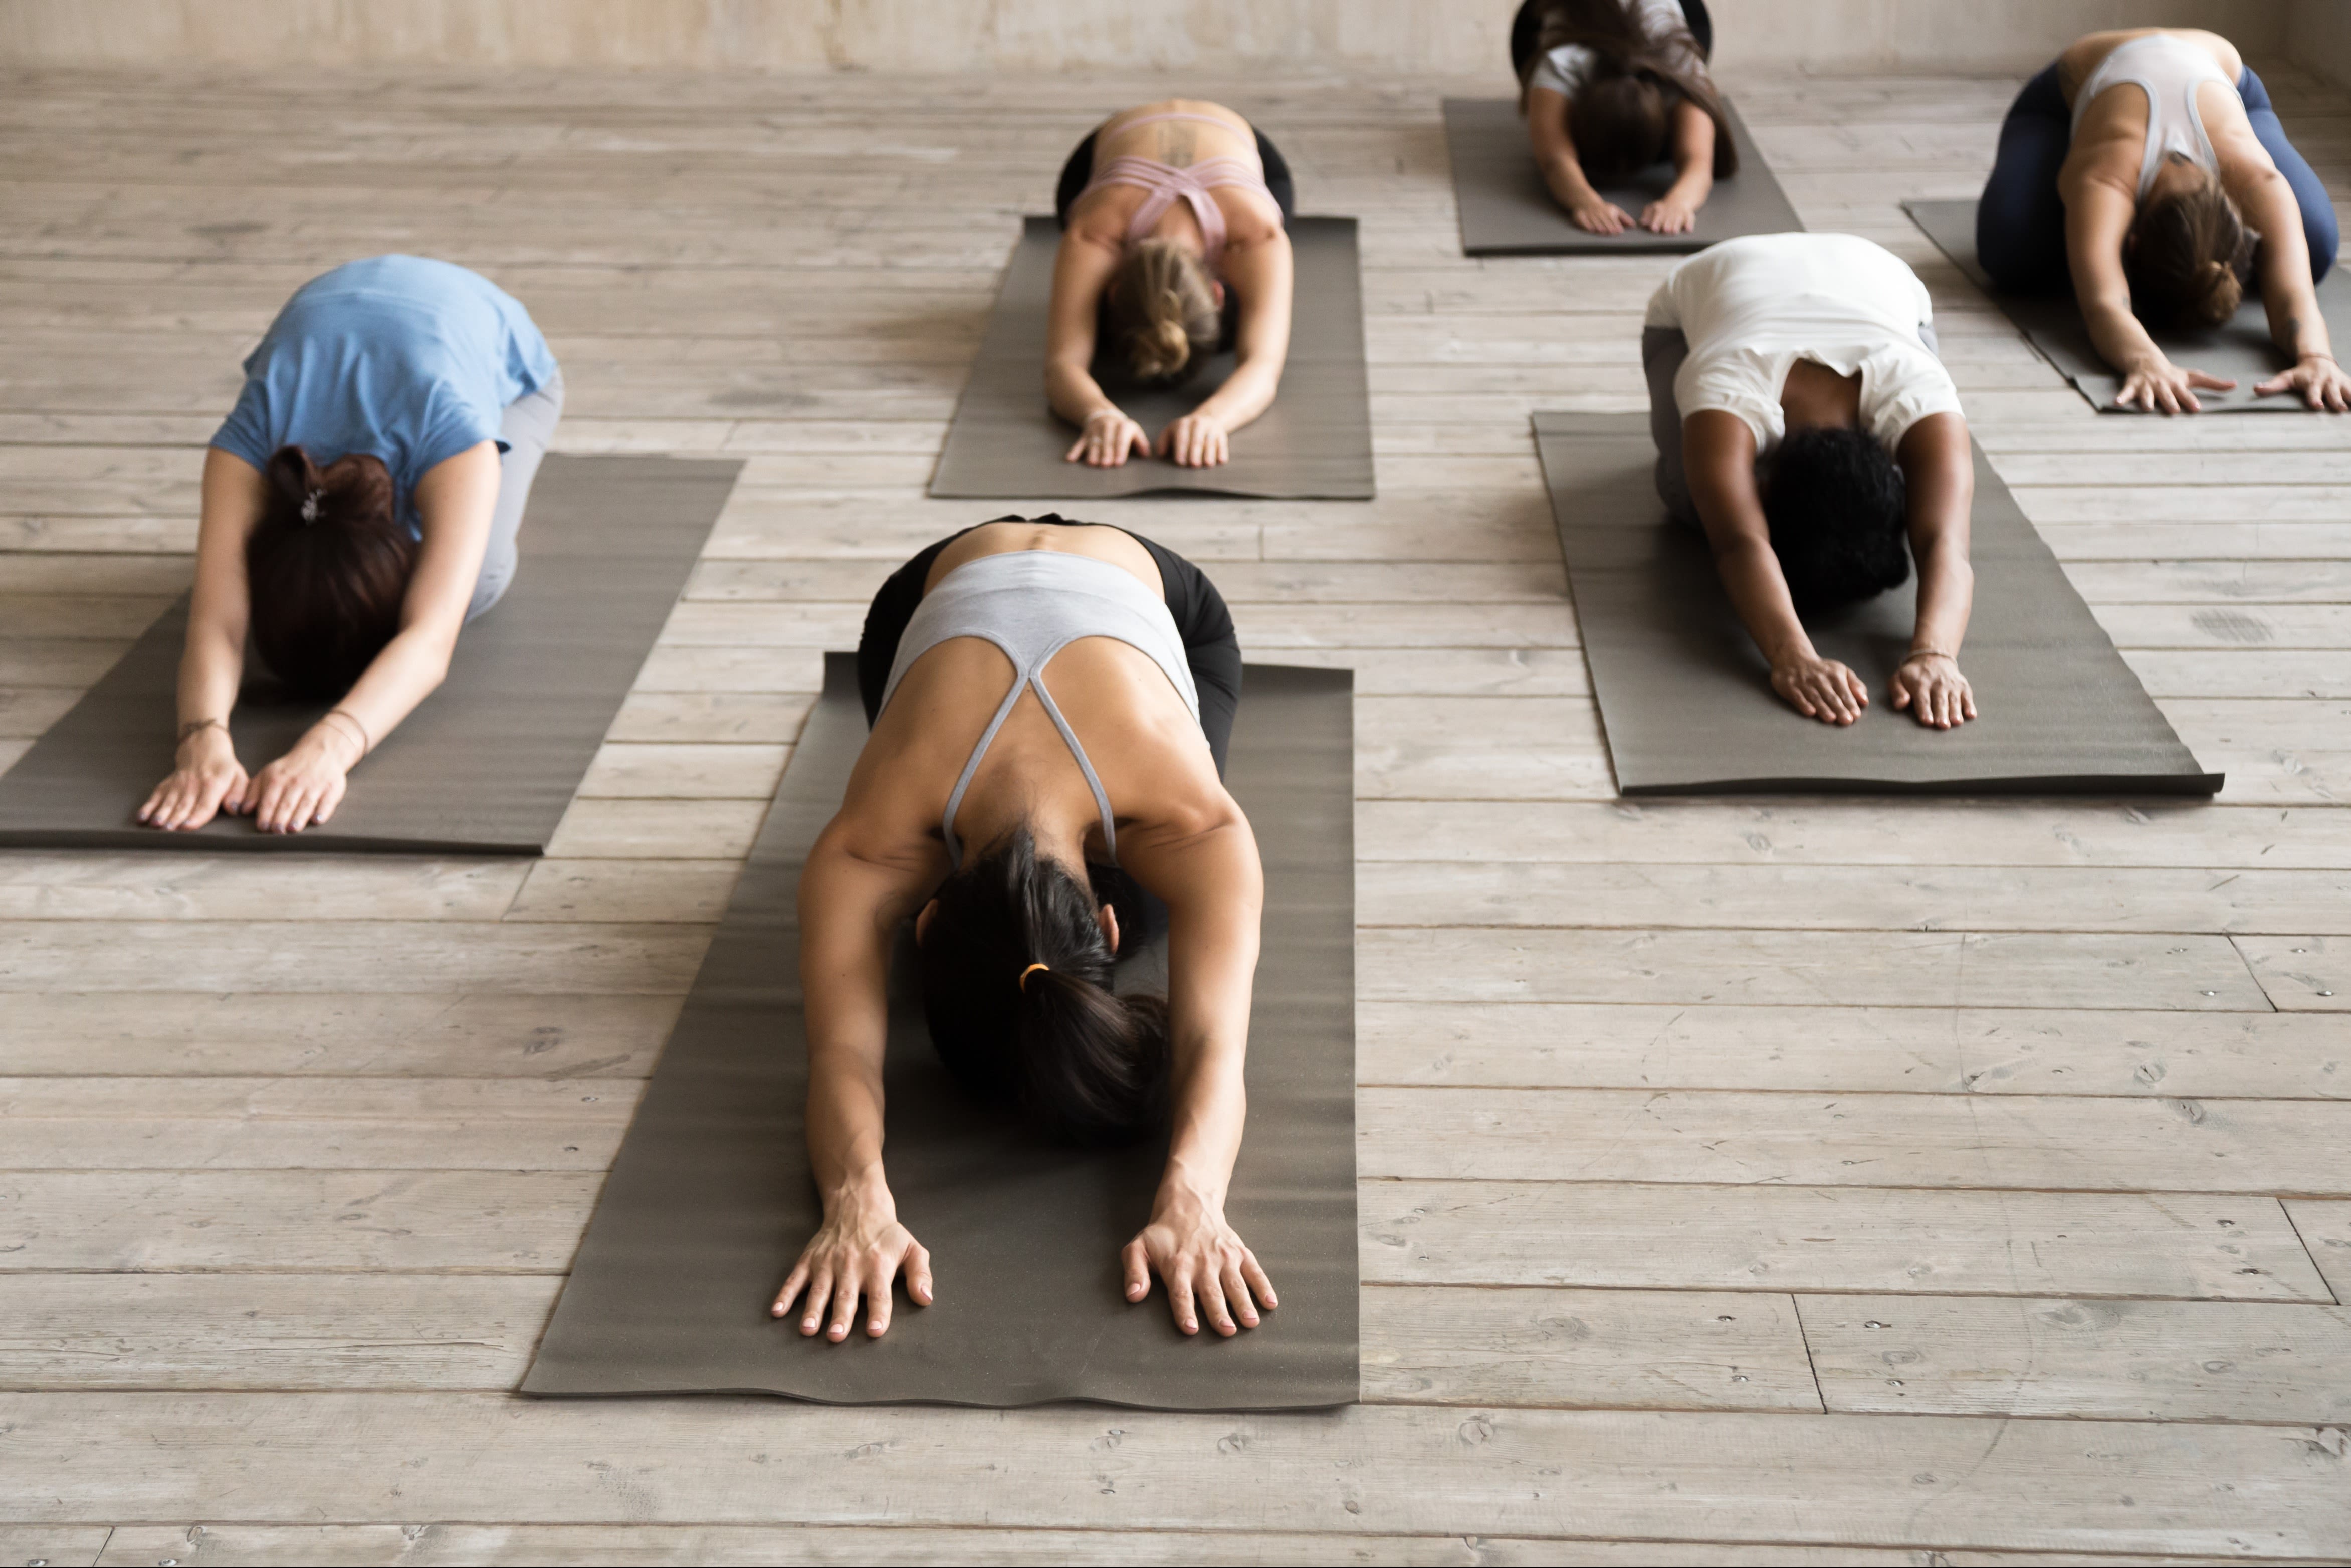 Our Yoga Place: Read Reviews and Book Classes on ClassPass